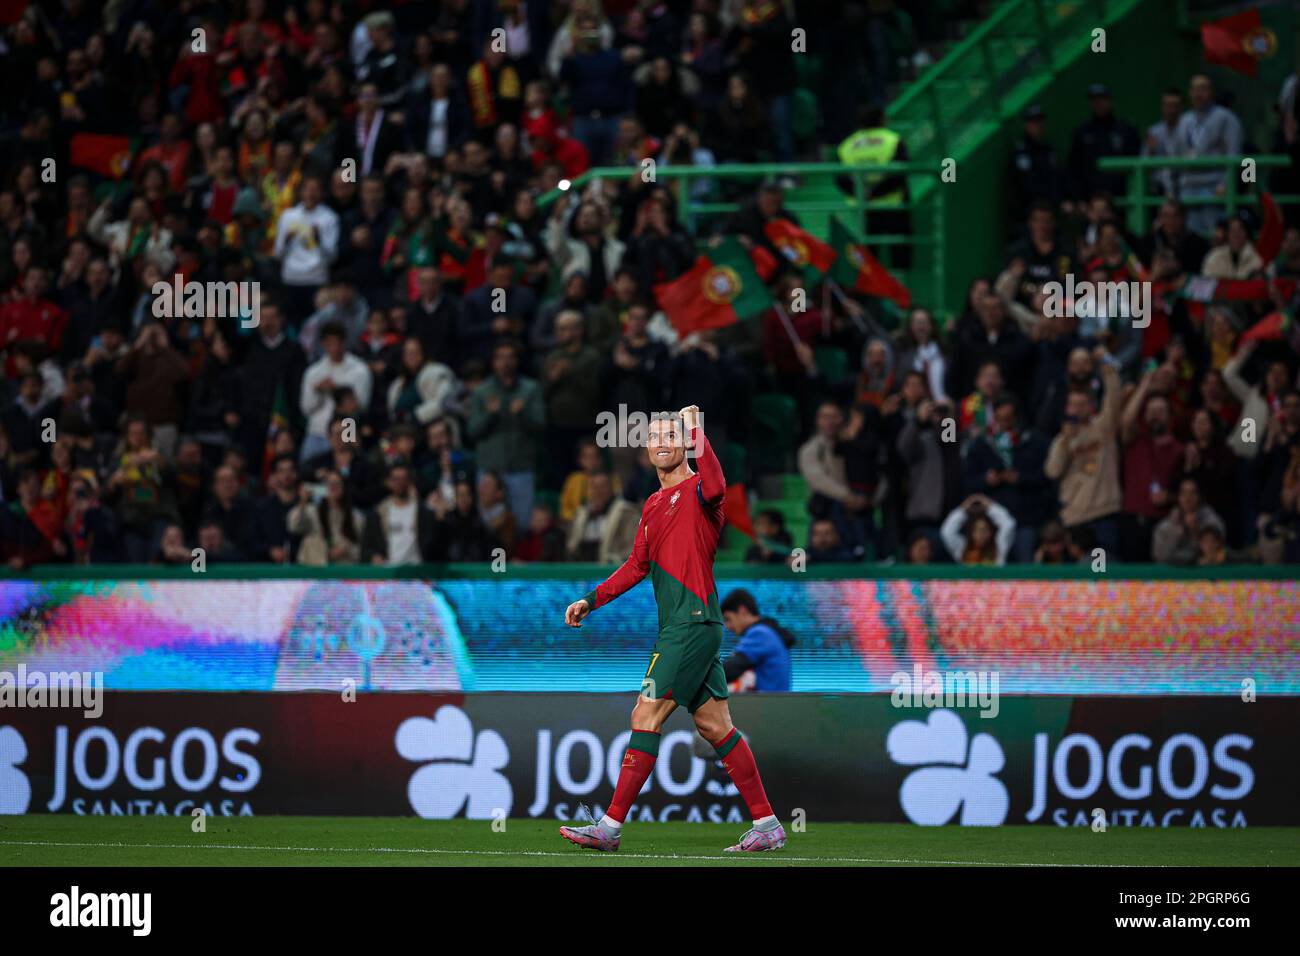 Lisbon, Portugal. 23rd Mar, 2023. Cristiano Ronaldo of Portugal celebrates  after scoring a goal during the UEFA Euro 2024 qualifying round group J  match between Portugal and Liechtenstein at Estadio Jose Alvalade.